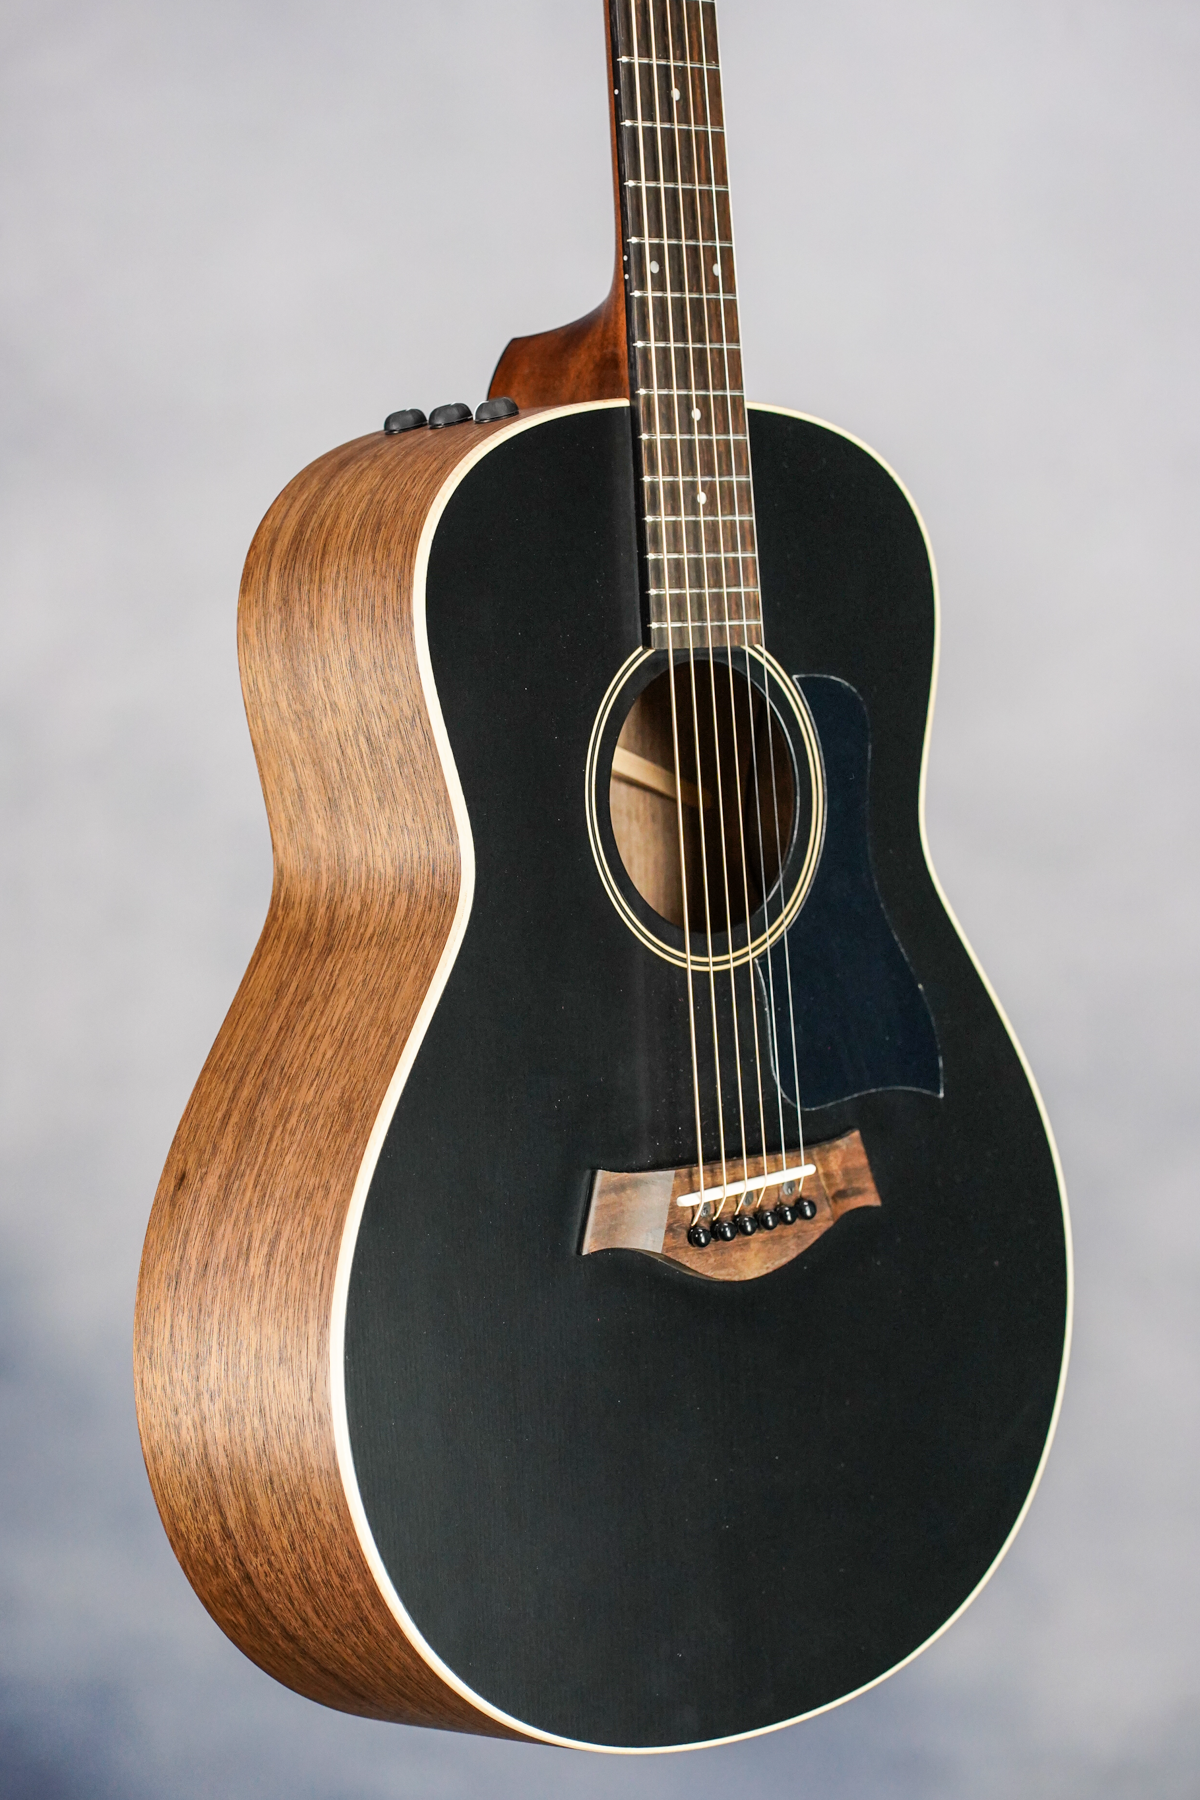 GTe Blacktop Grand Theater Electric Acoustic Guitar